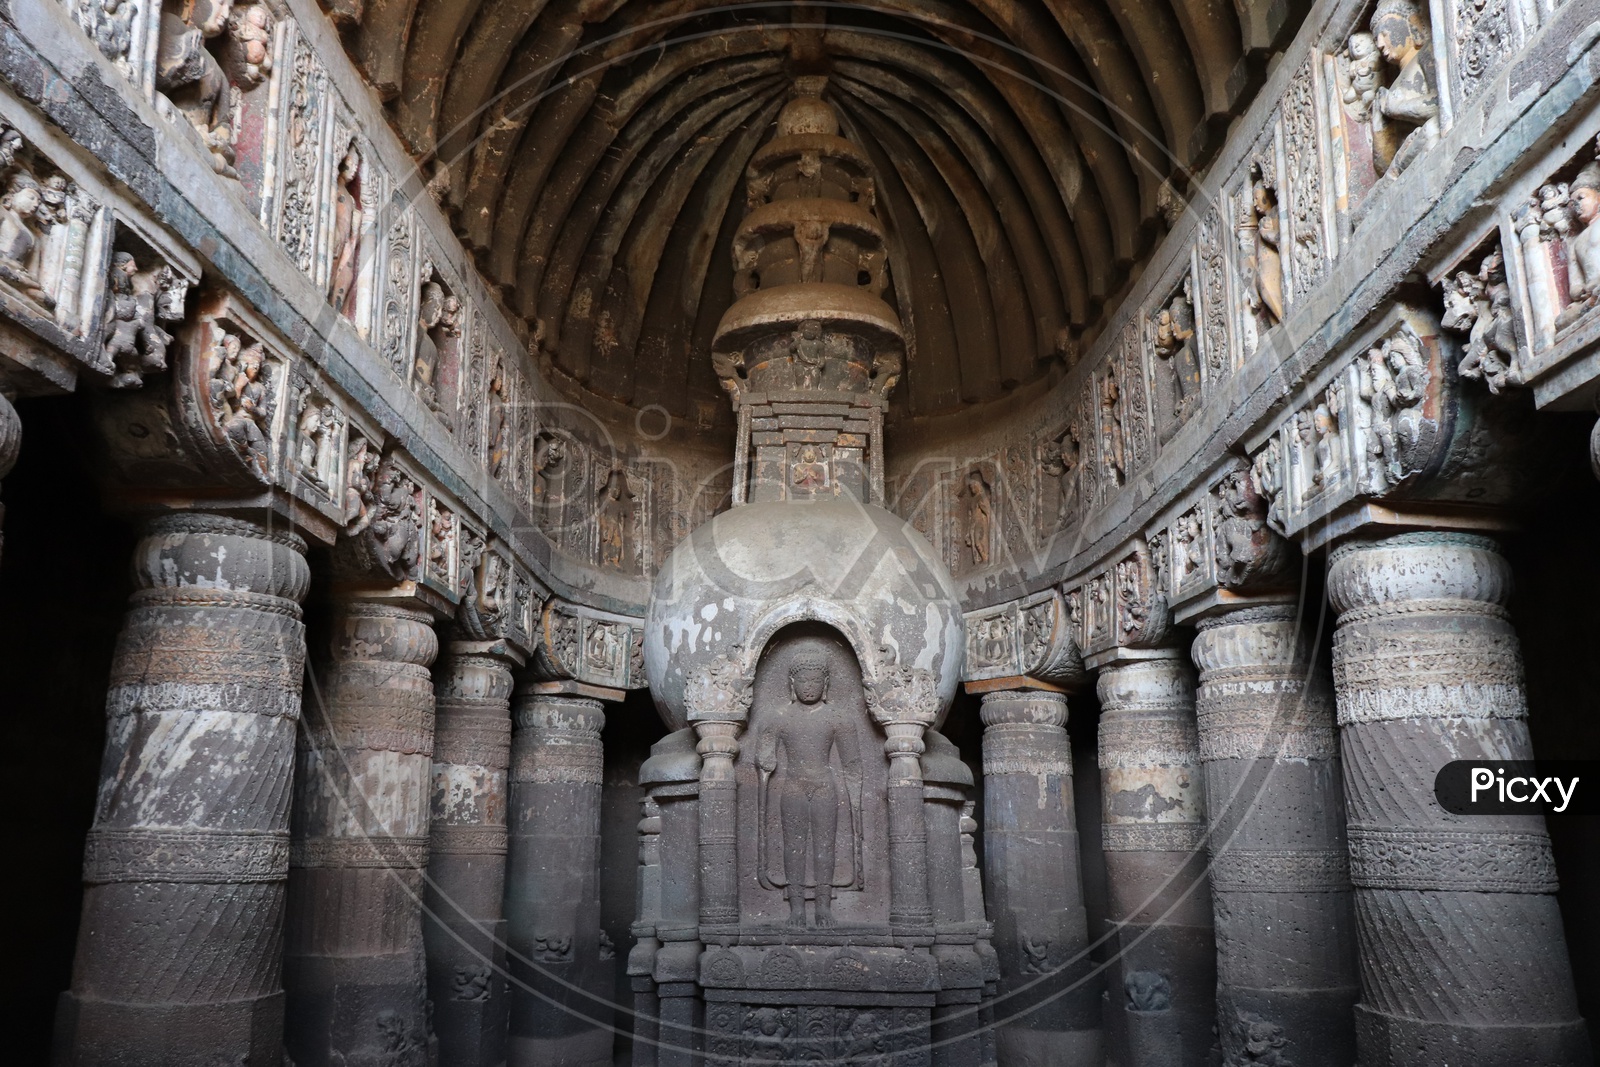 Stone Sculptures of Buddha Statues in Ajanta Caves